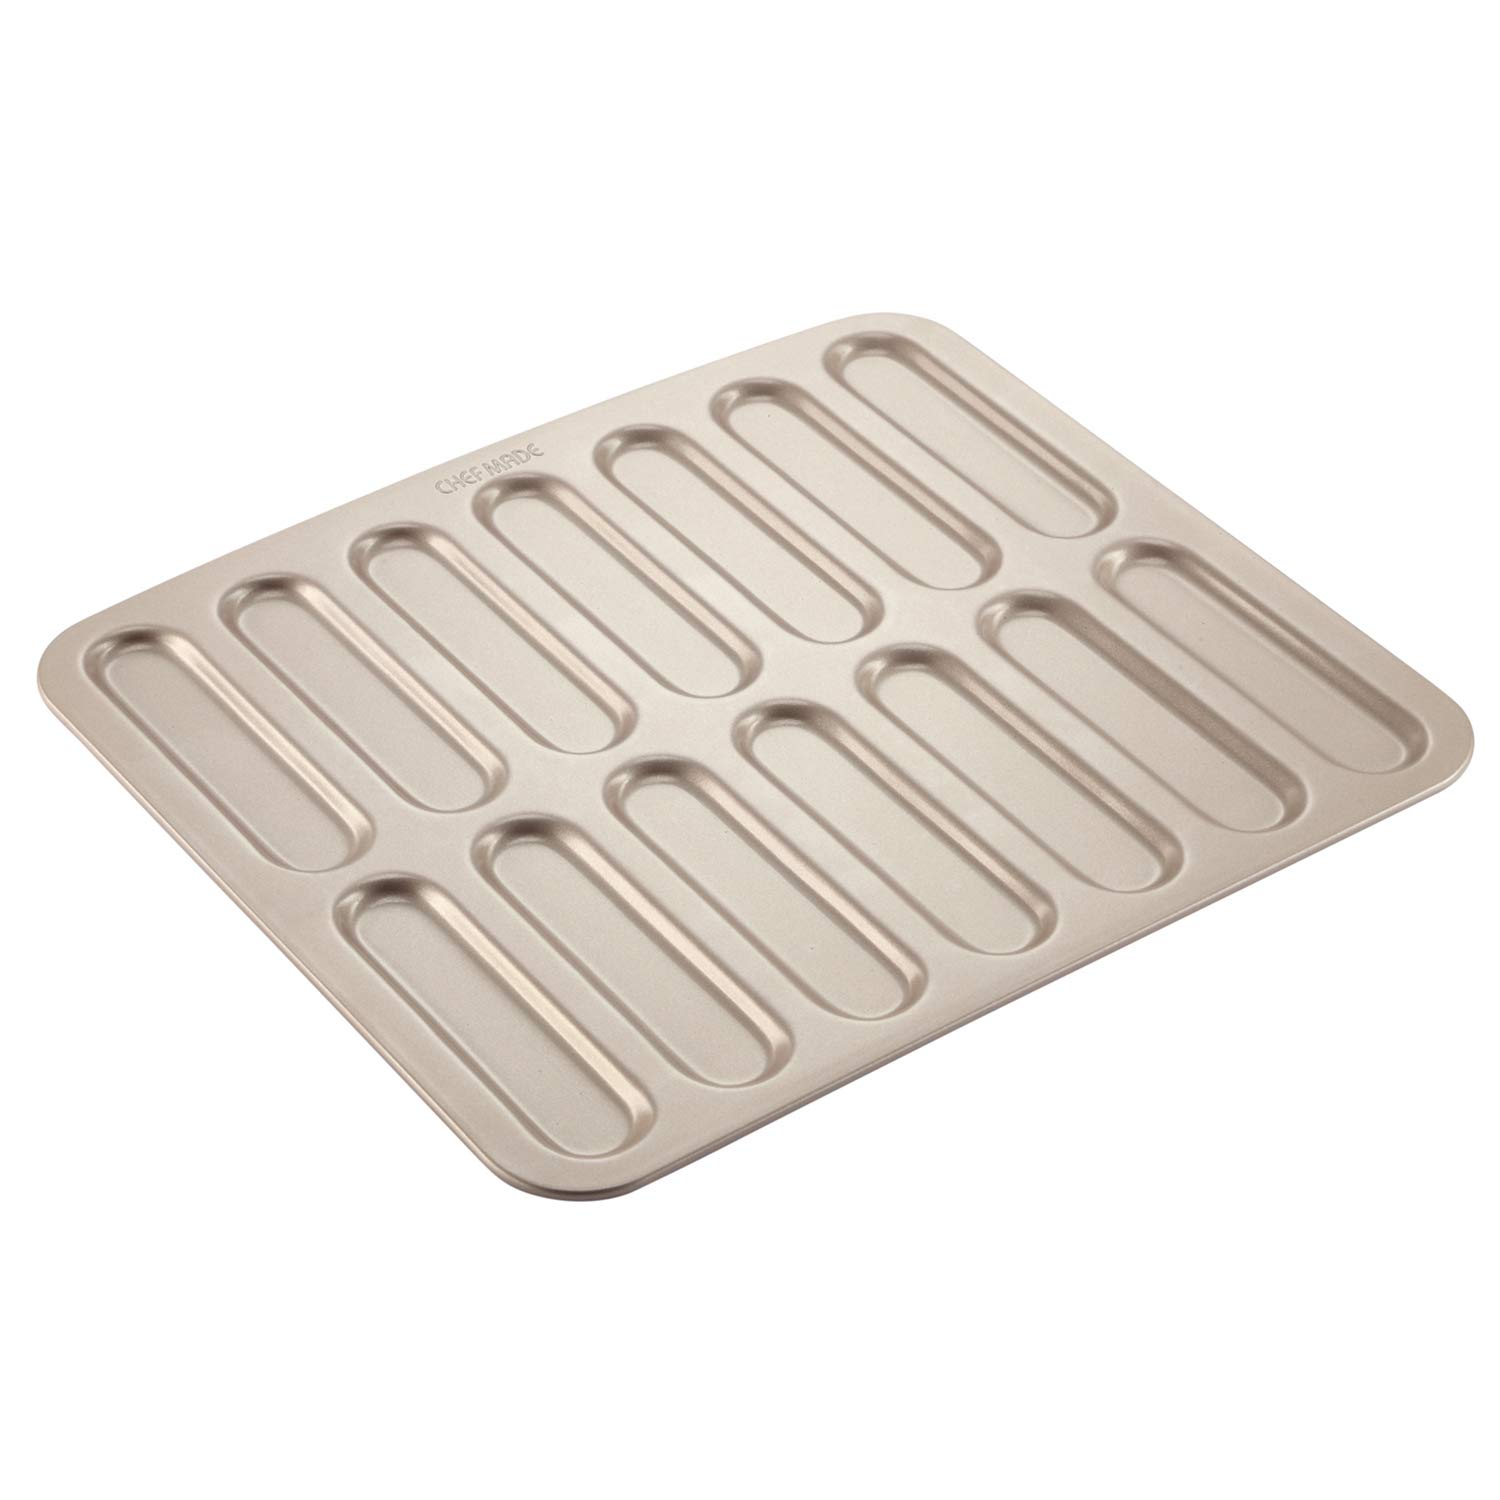 CAKE PAN PLASTIC HORSE SHOE - Cake Supplies for Less